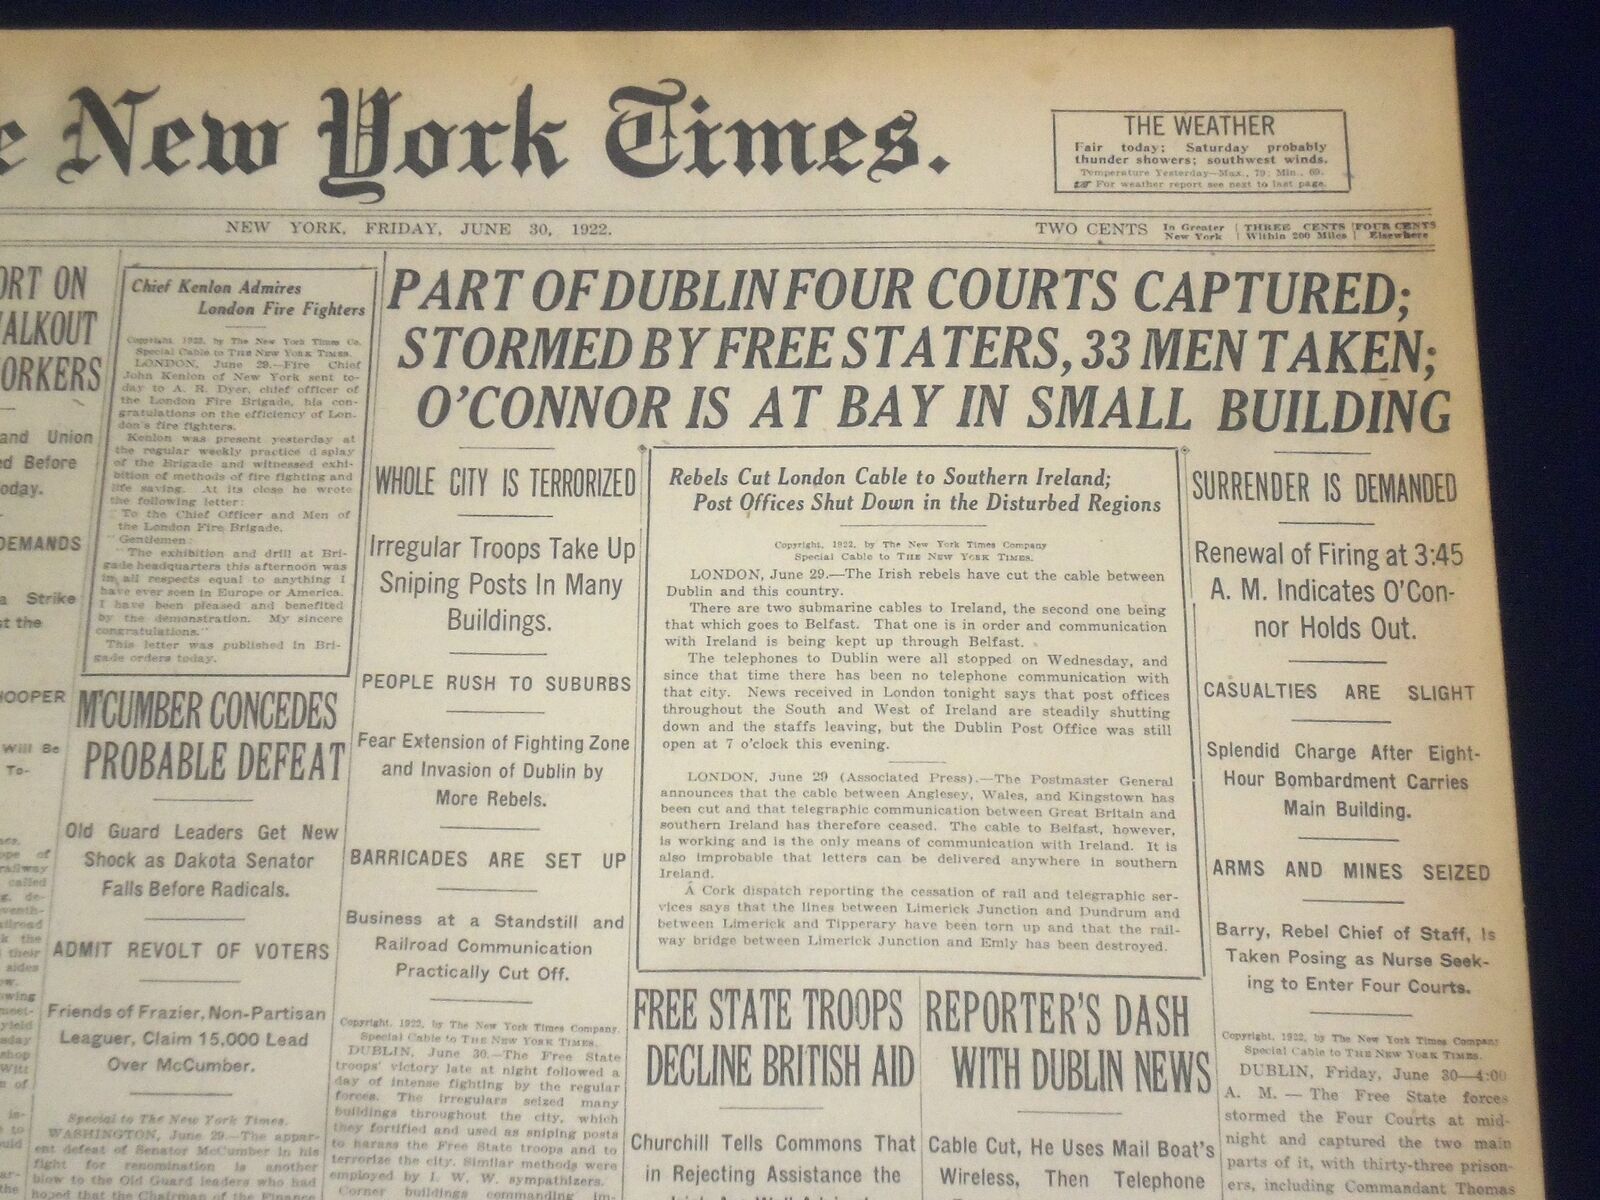 1922 JUNE 30 NEW YORK TIMES - PART OF DUBLIN FOUR COURTS CAPTURED - NT 8403